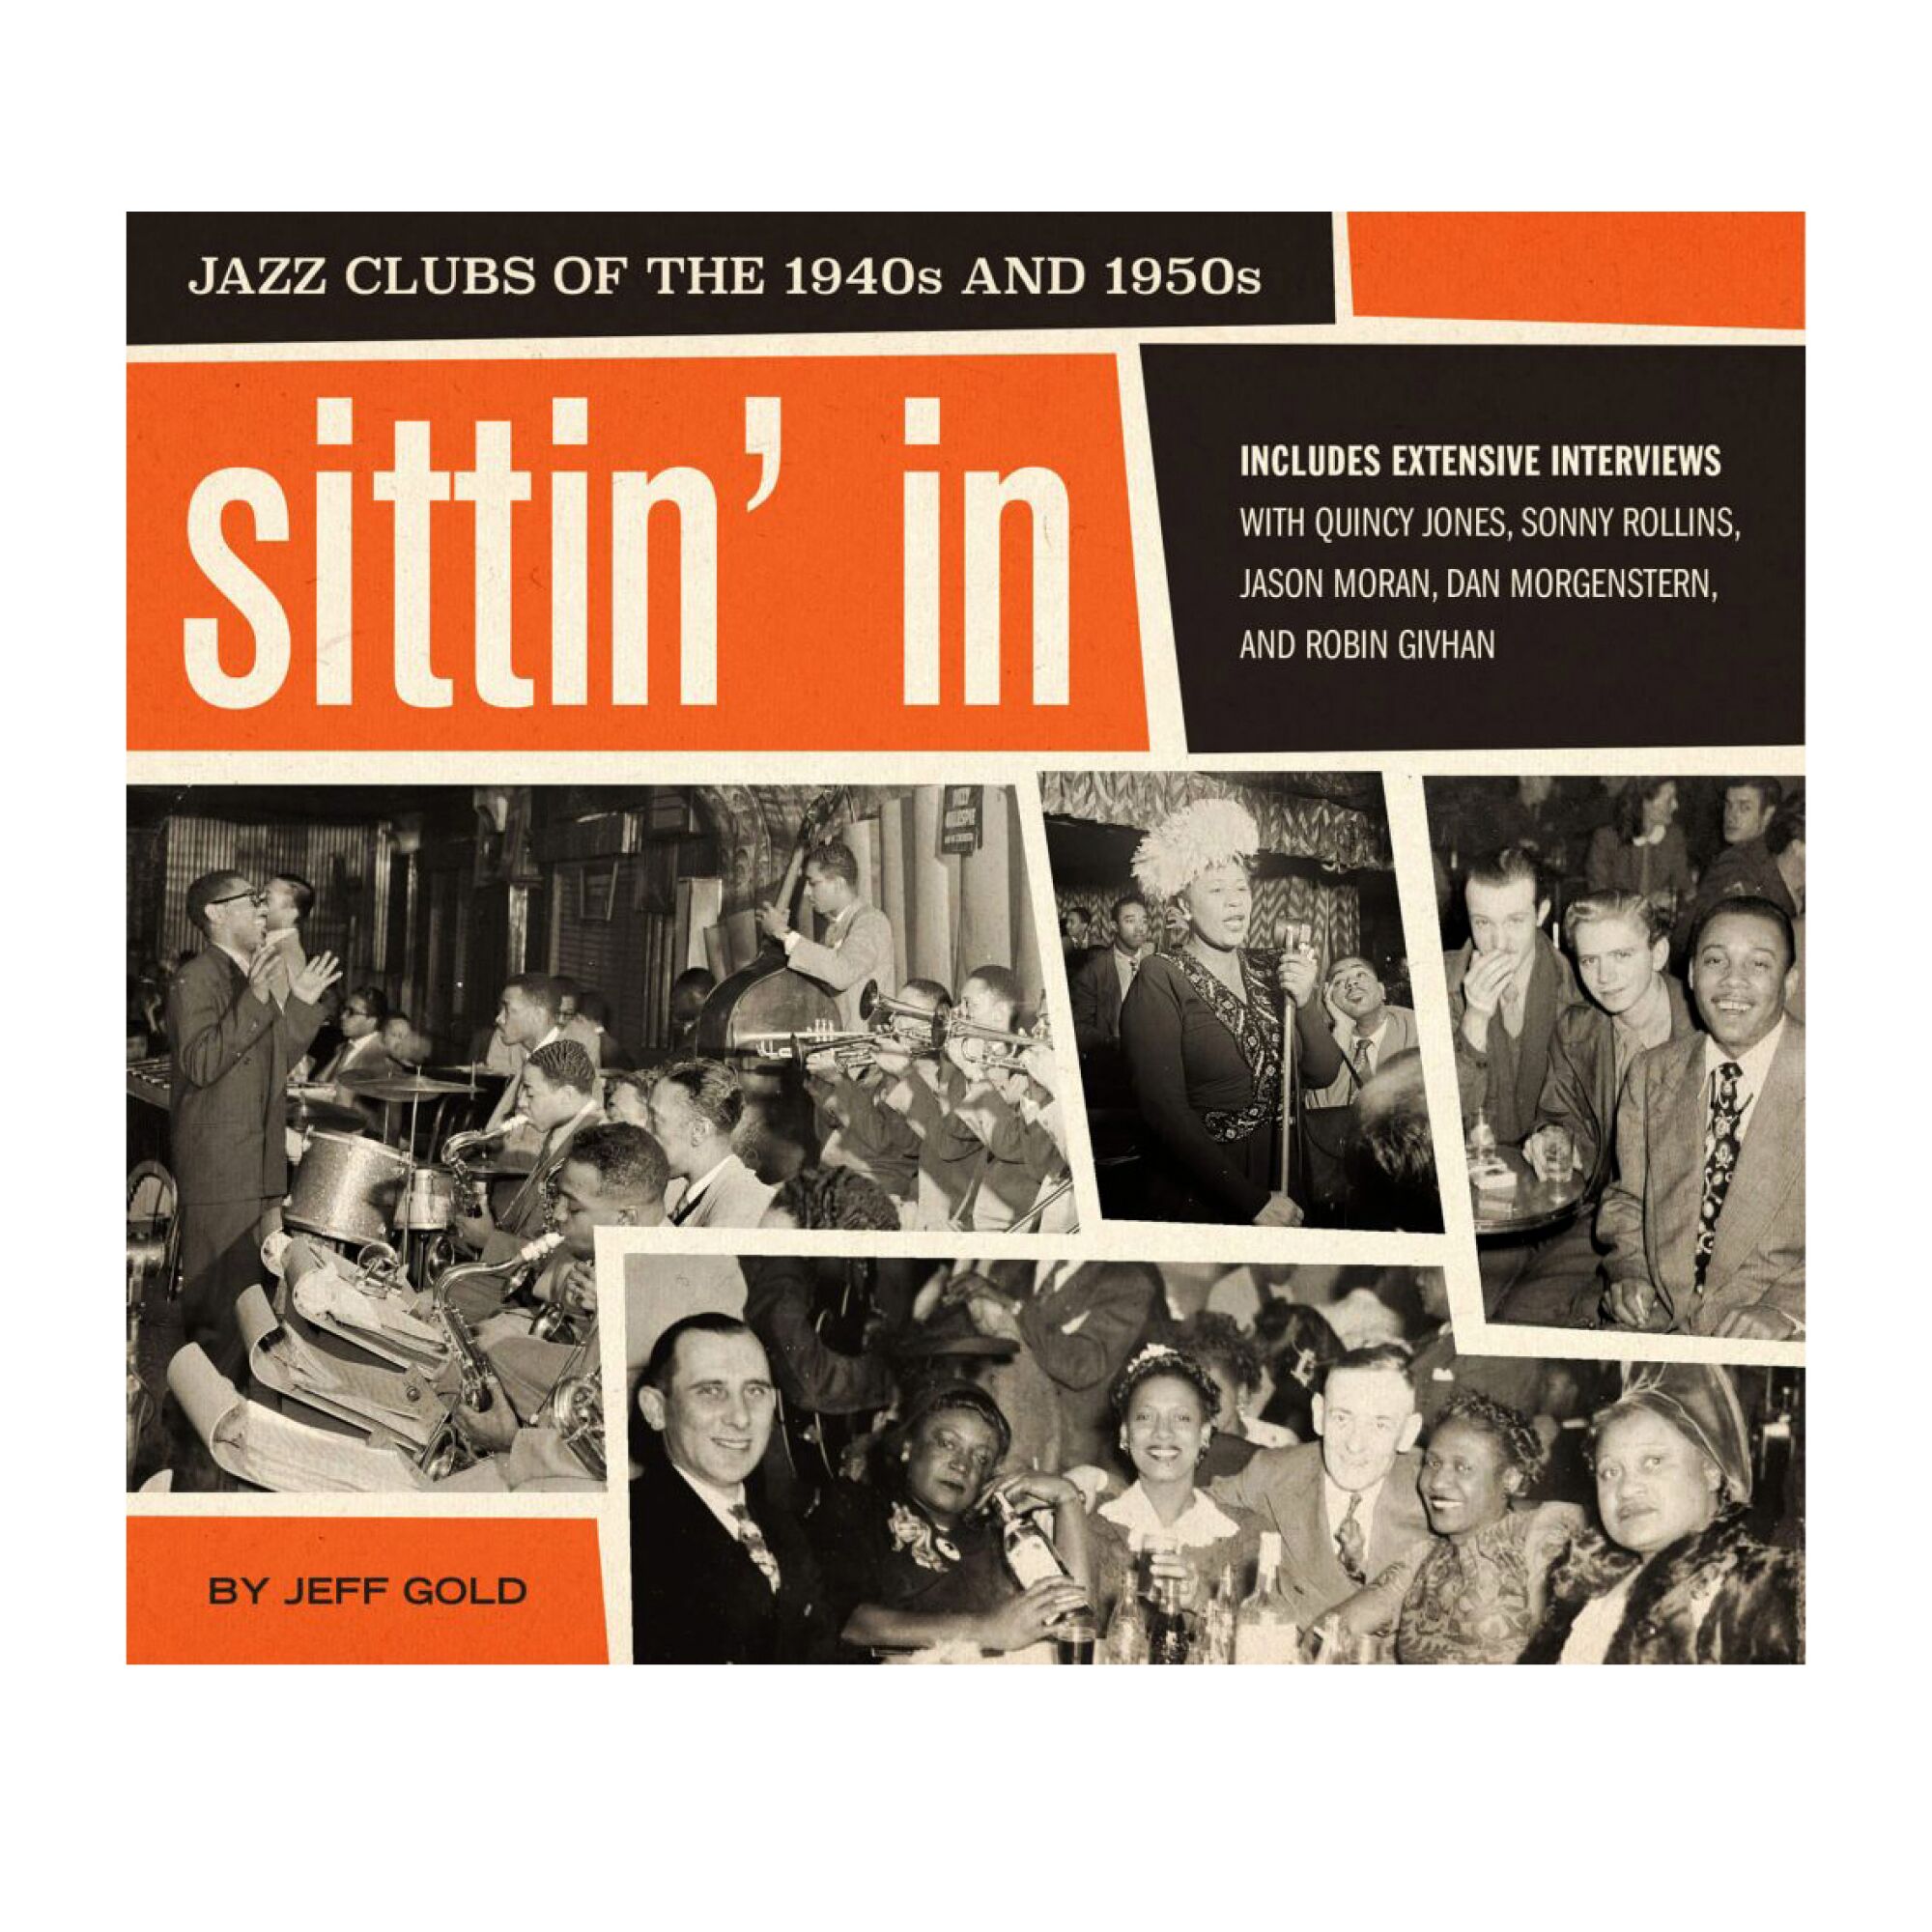 Jeff Gold, "Sittin' in: Jazz Clubs of the 1940s and 1950s" 